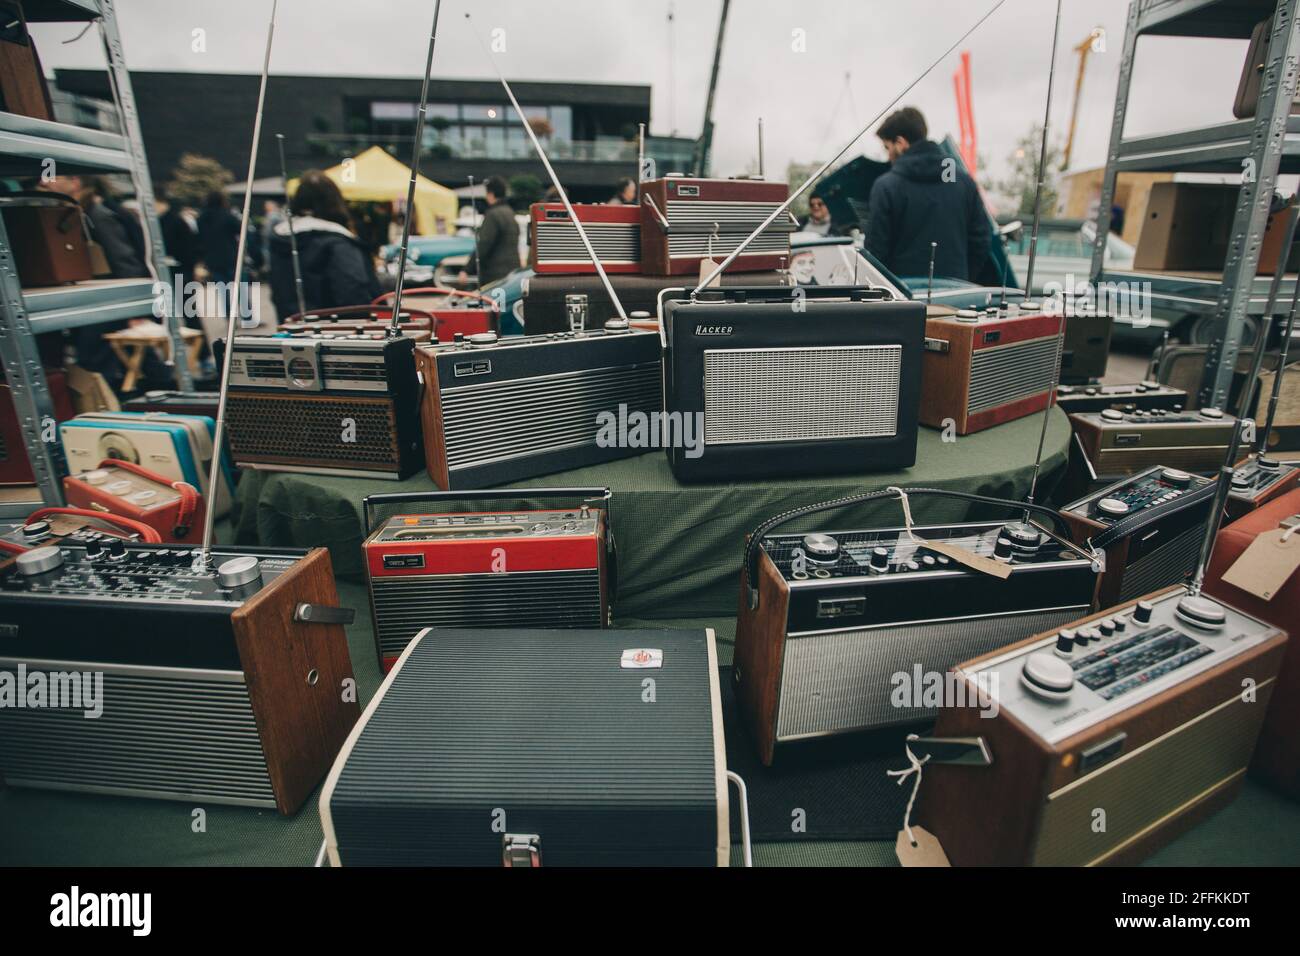 London/UK - 29 April 2018: Classic Car Boot Sale by Vintage. Retro festival where people selling their vintage clothing and other goods from jewellery Stock Photo